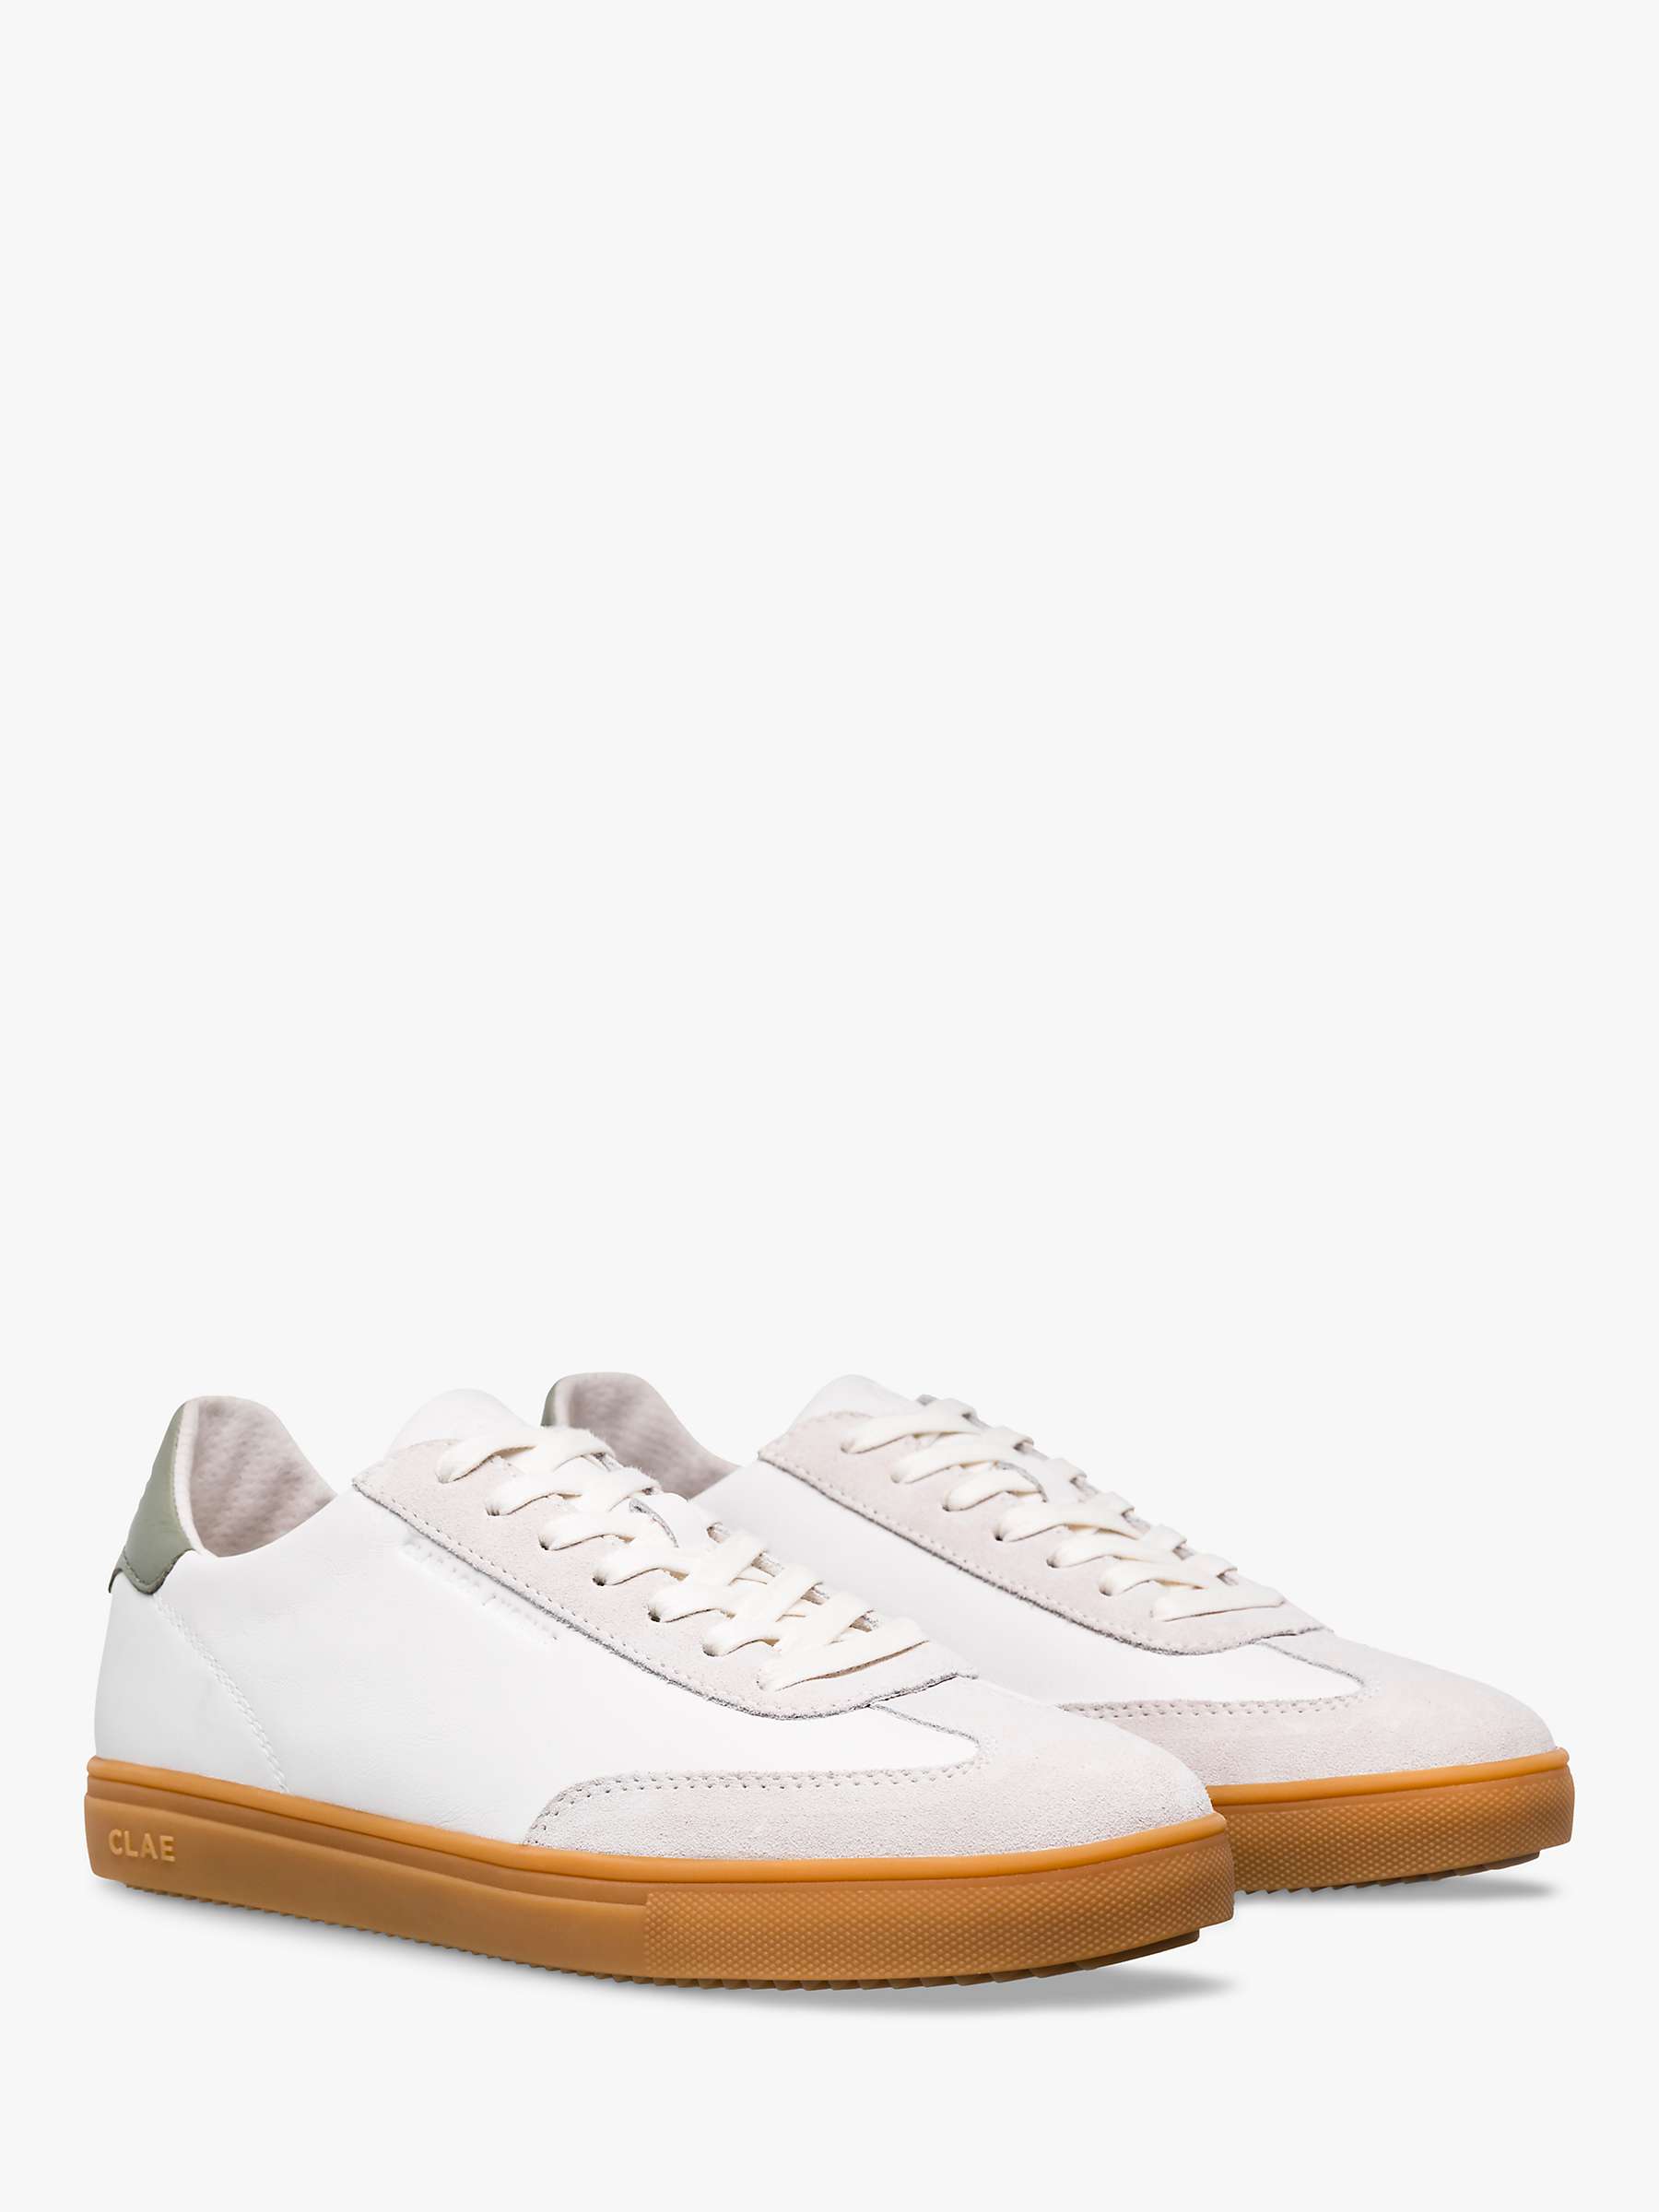 Buy CLAE Deane Leather Low Top Trainers, White Tea Gum Online at johnlewis.com